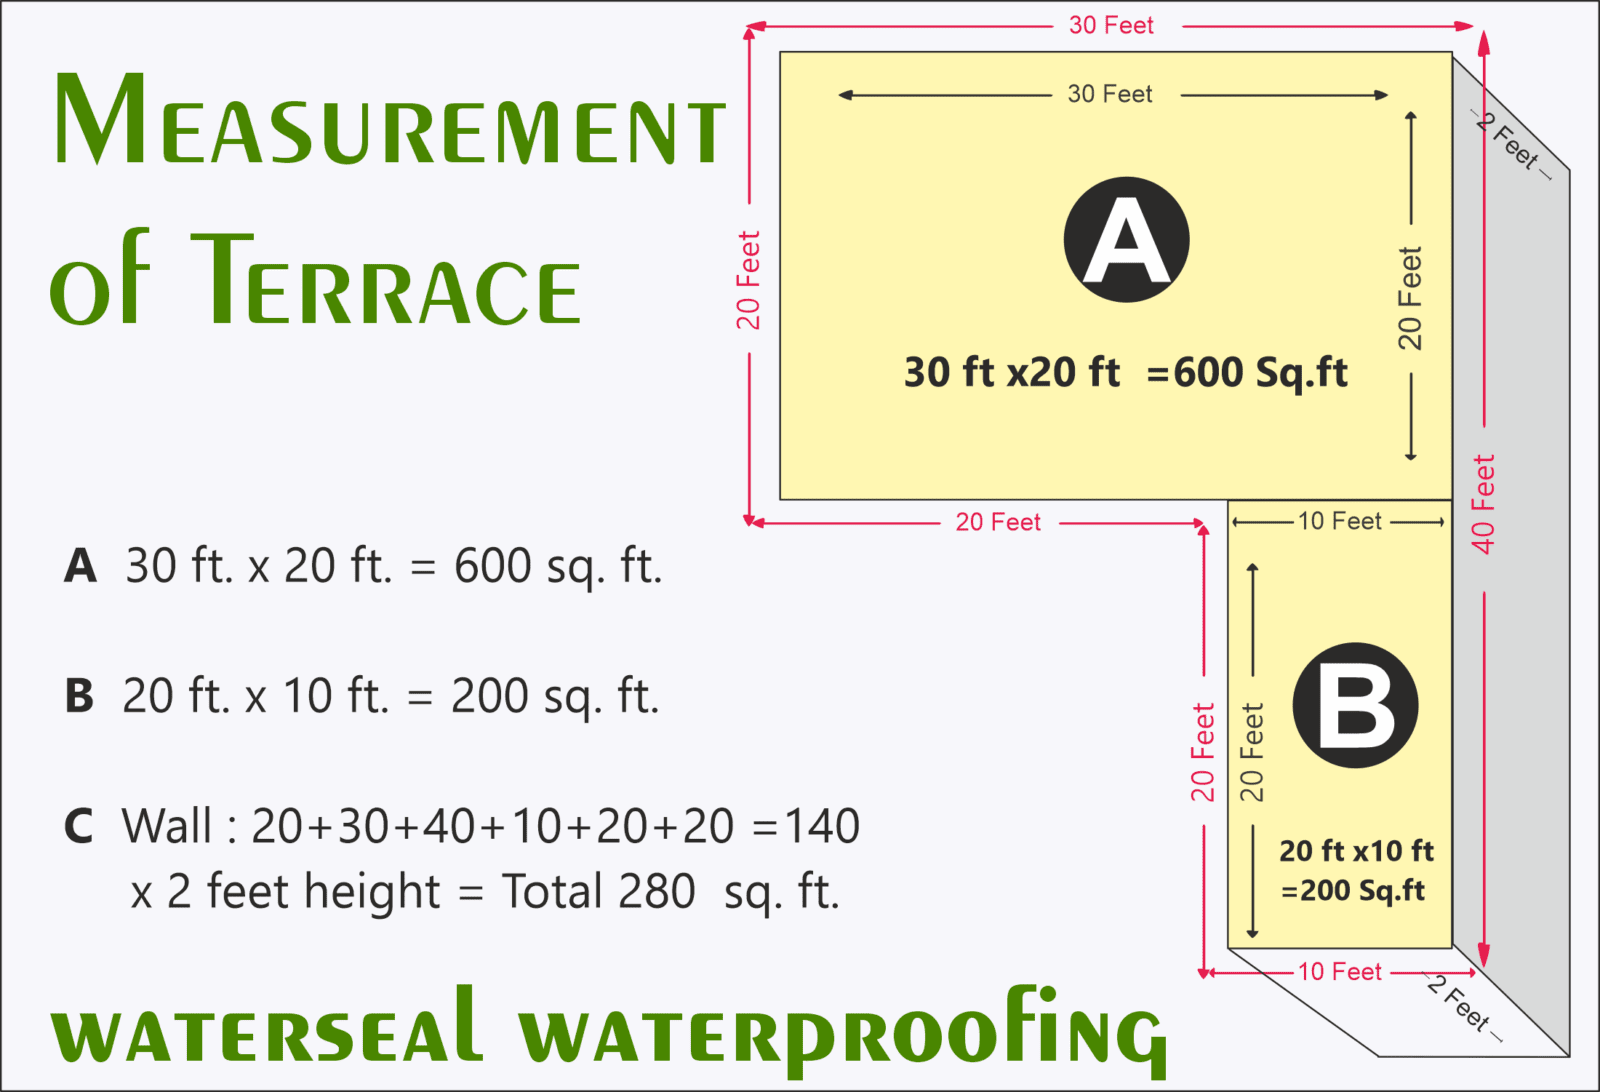 How to measurement of terrace